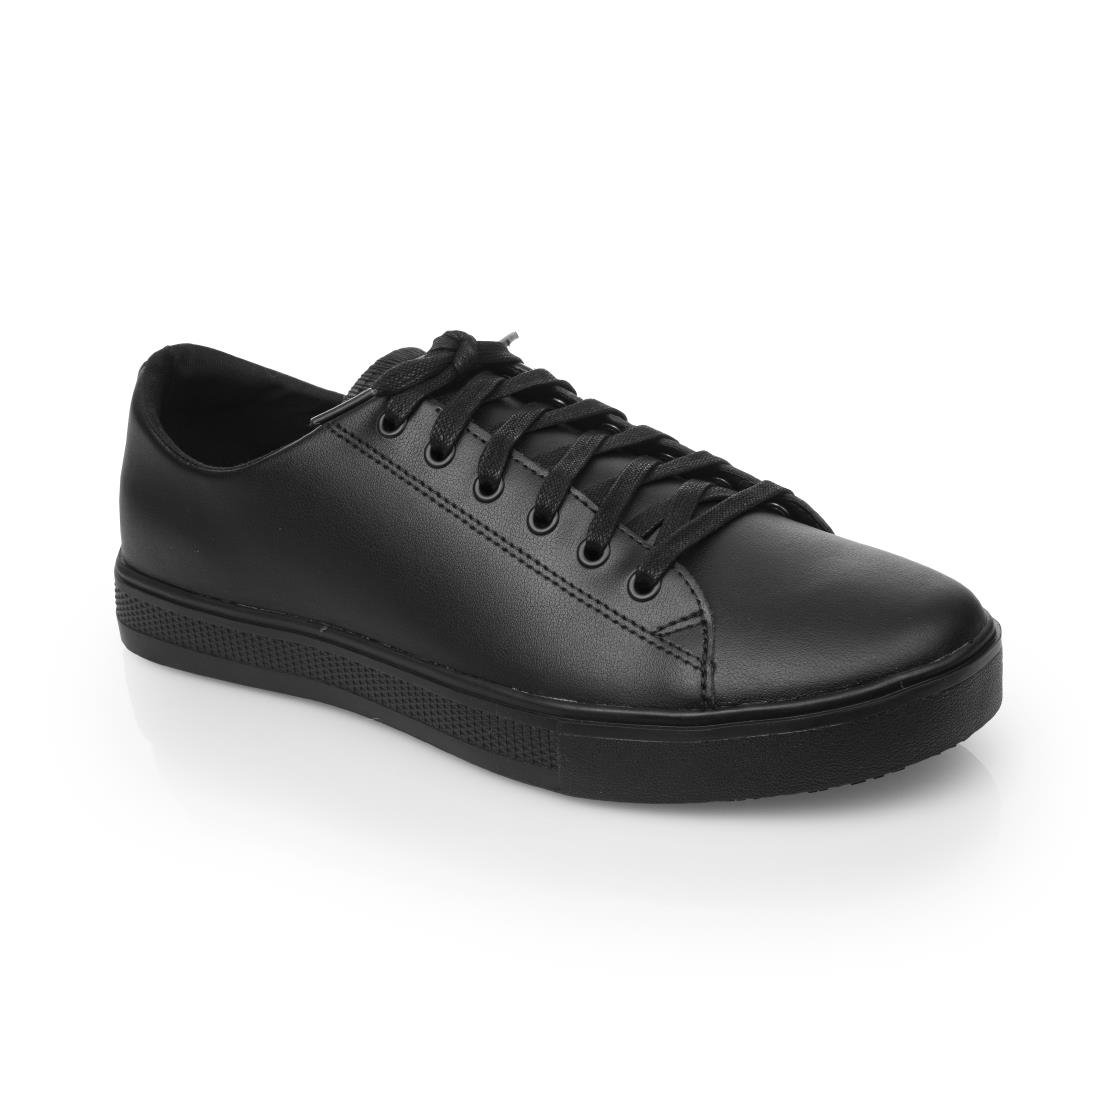 BB161-45 Shoes for Crews Old School Trainers Black 45